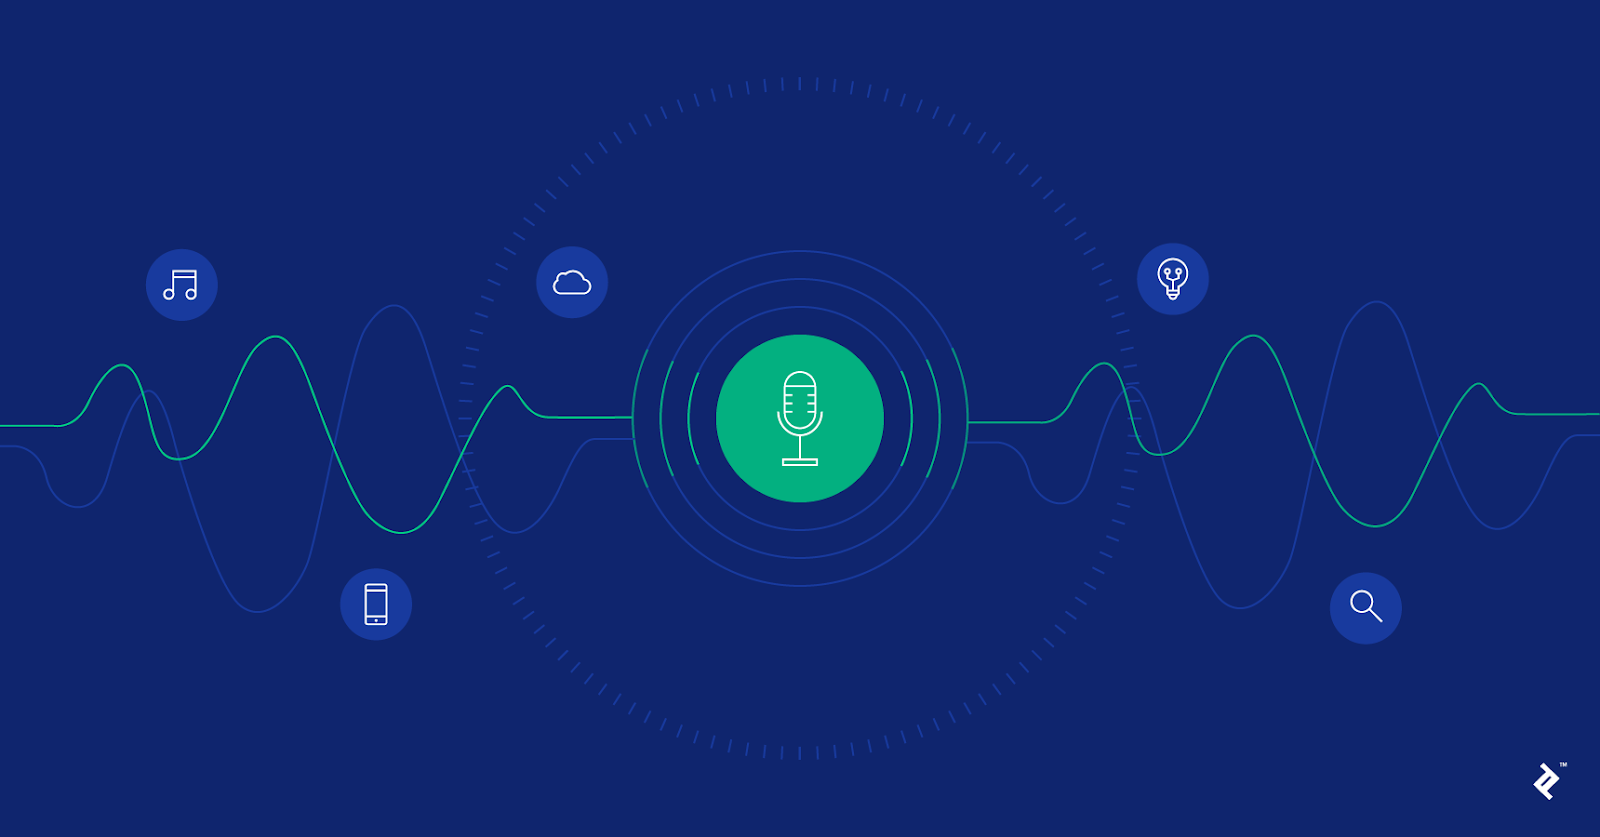 Learn to Design a Flawless Voice User Interface Design